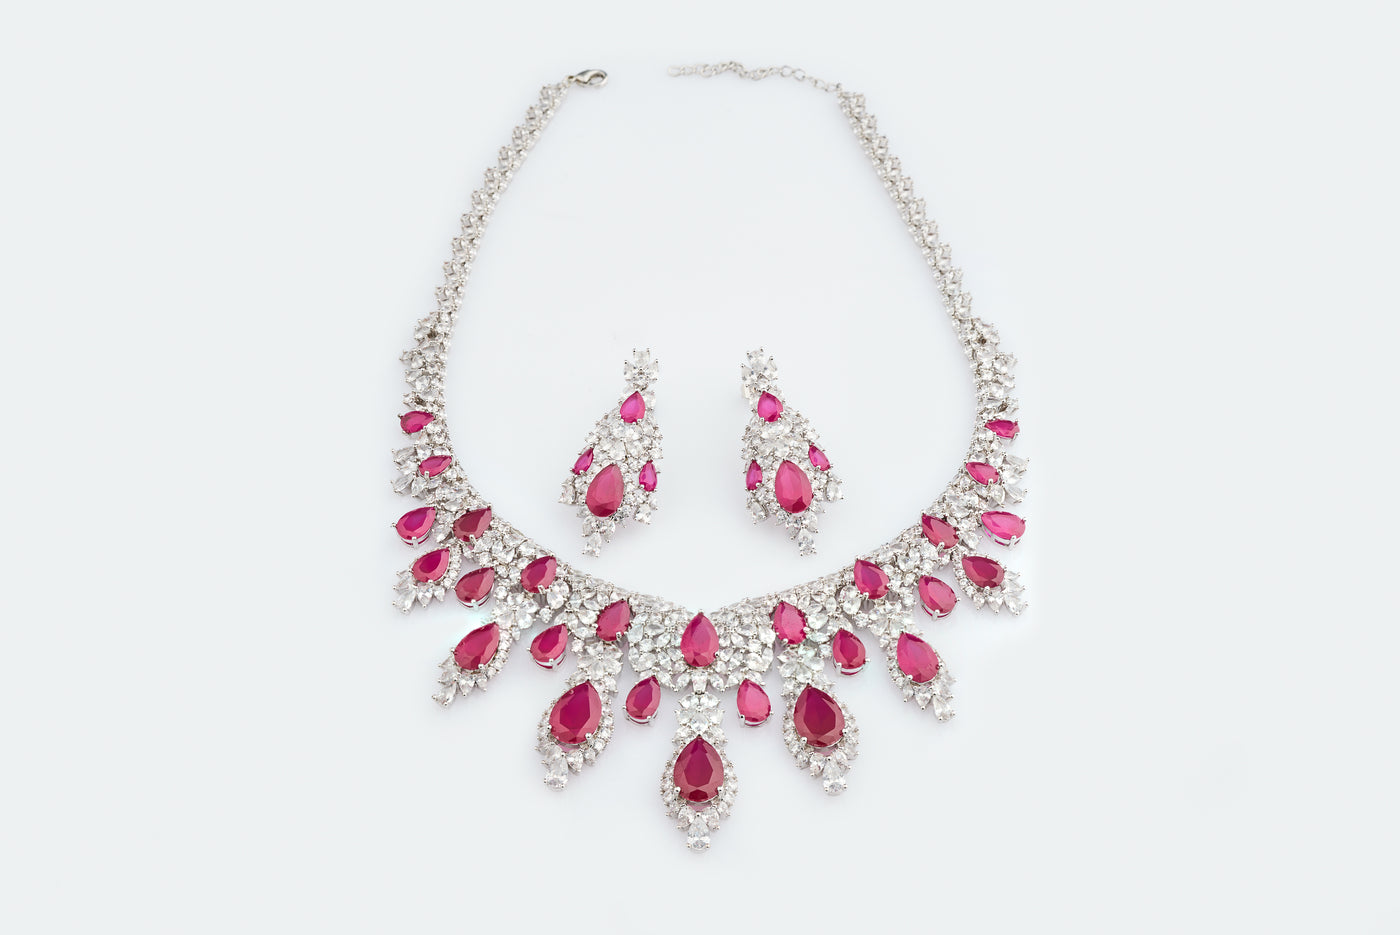 The Royalty Necklace set